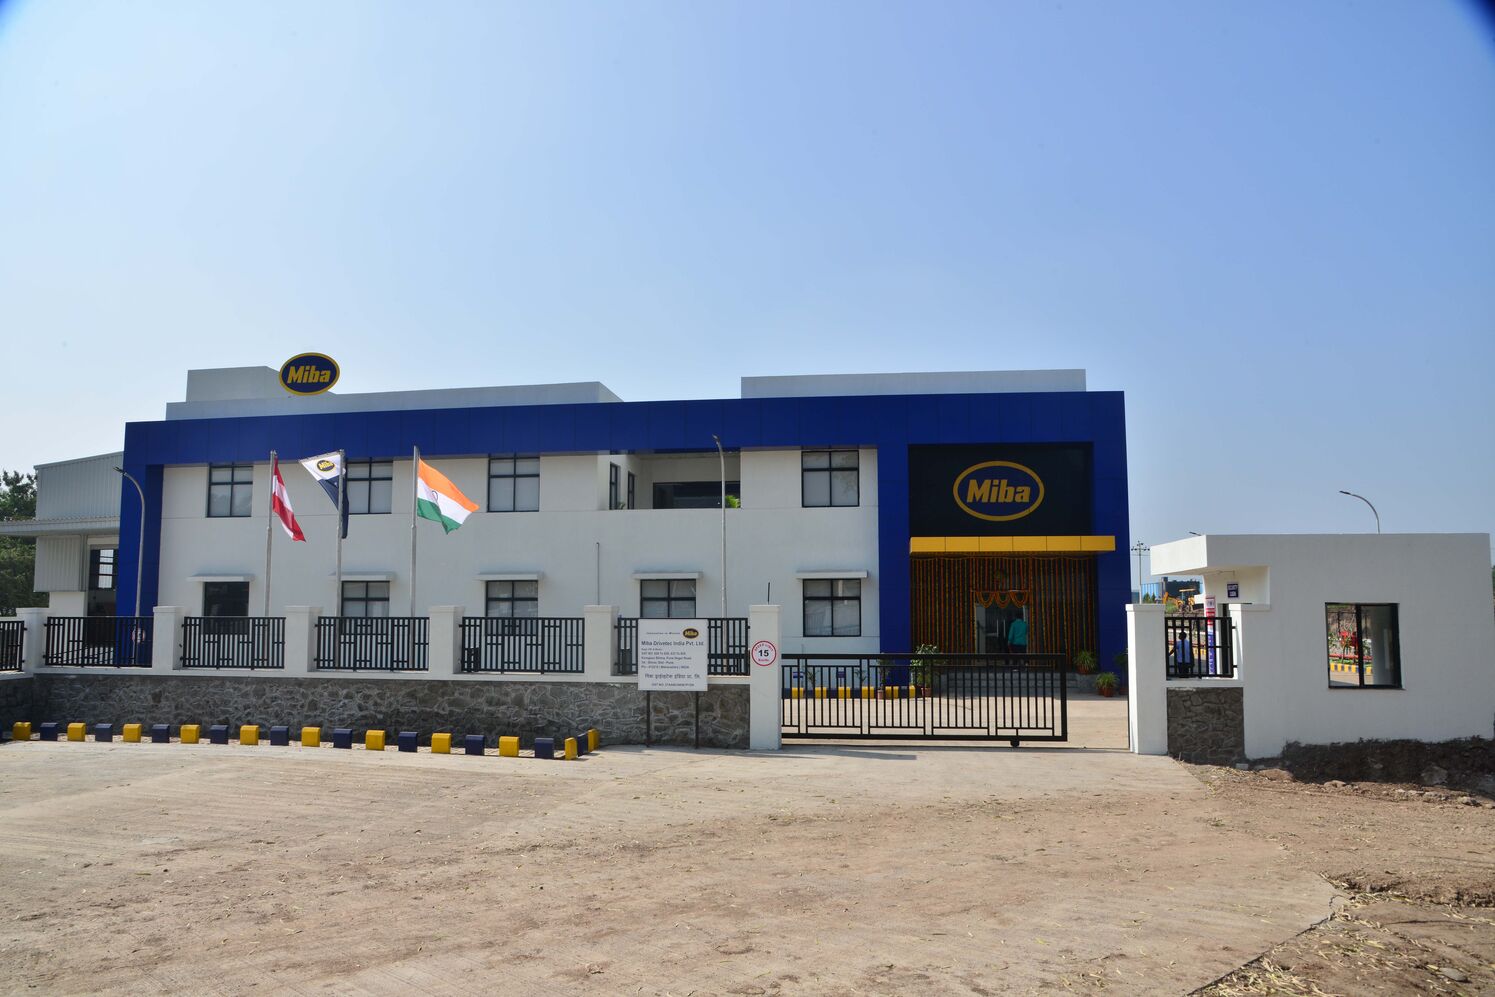 Front View of the Miba Drivetec India Location